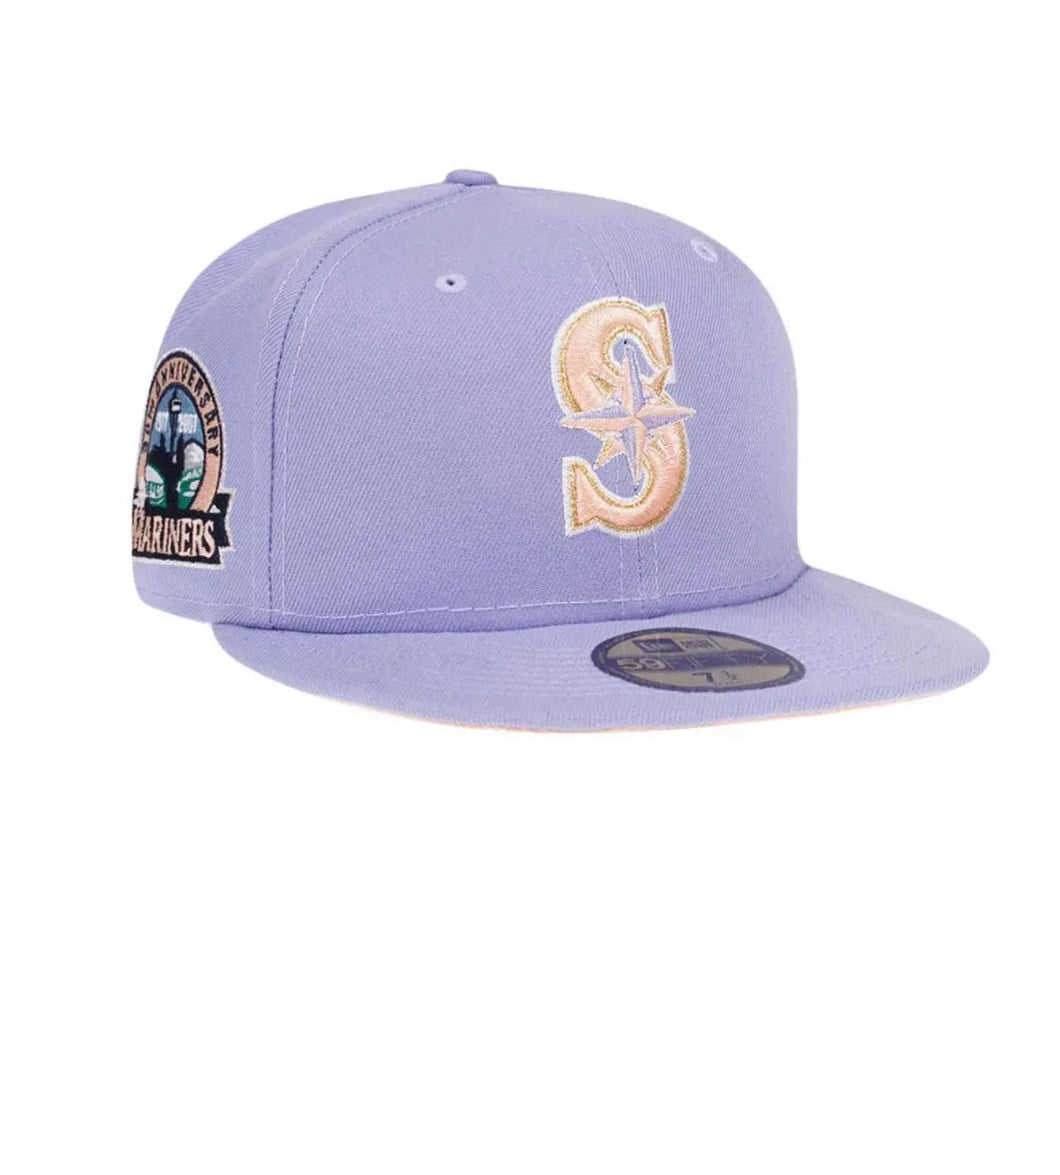 NEW ERA SEATTLE MARINERS 30TH ANNIVERSARY LAVENDER PEACH EDITION 59FIFTY FITTED HAT